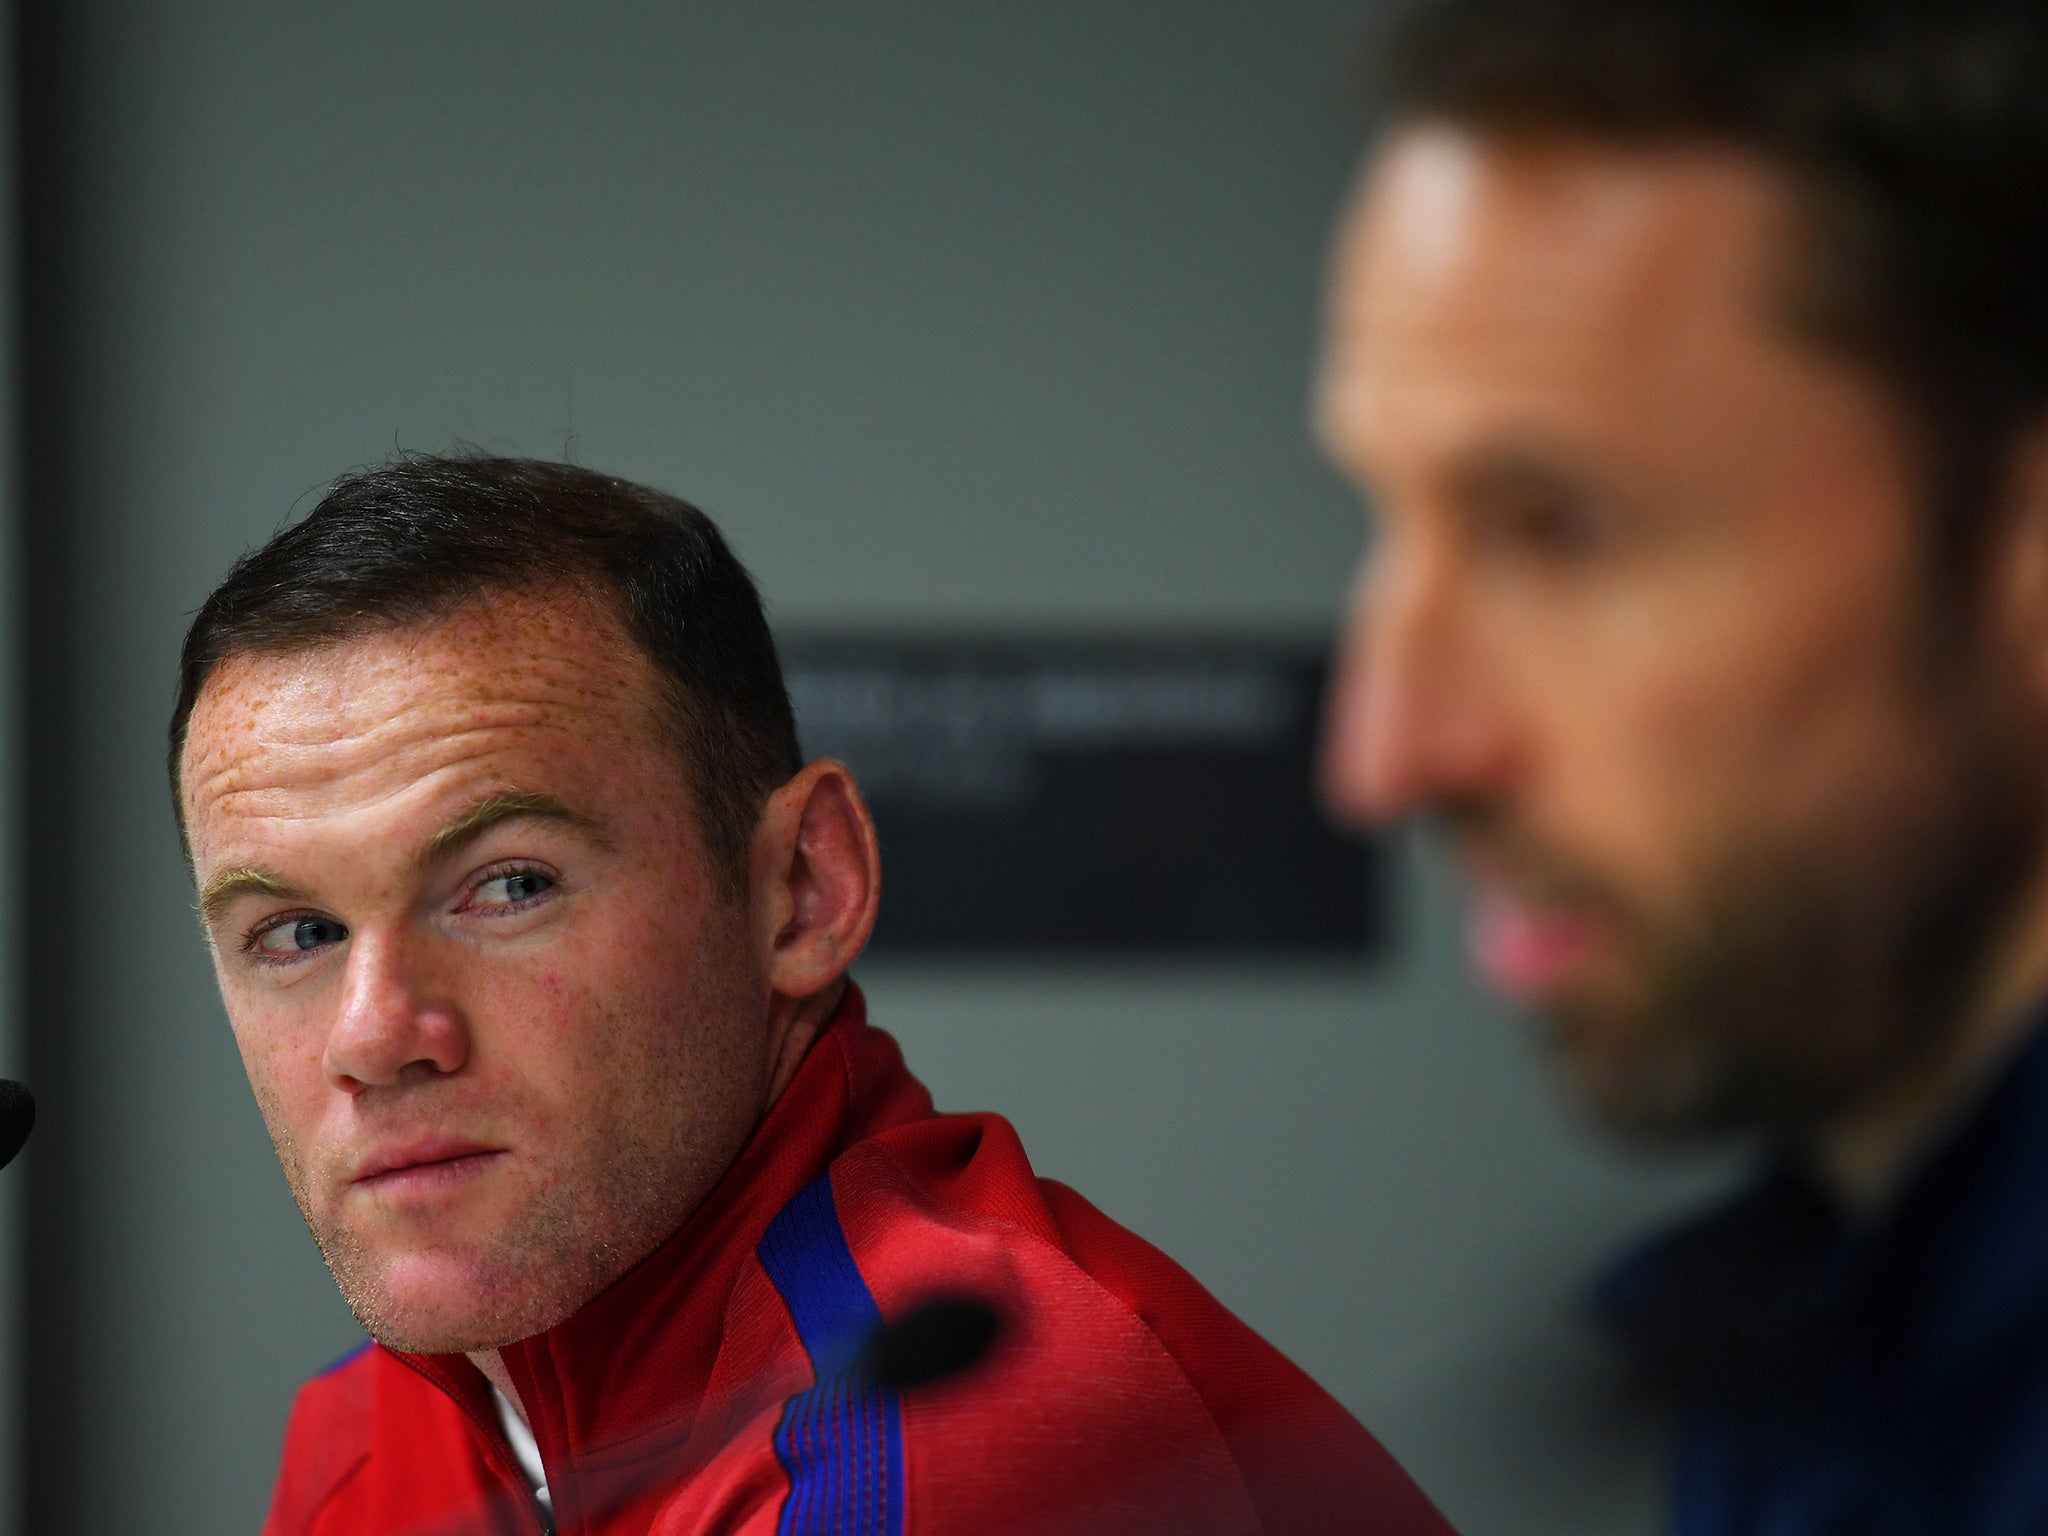 Wayne Rooney's days with the England national team could be numbered under Gareth Southgate